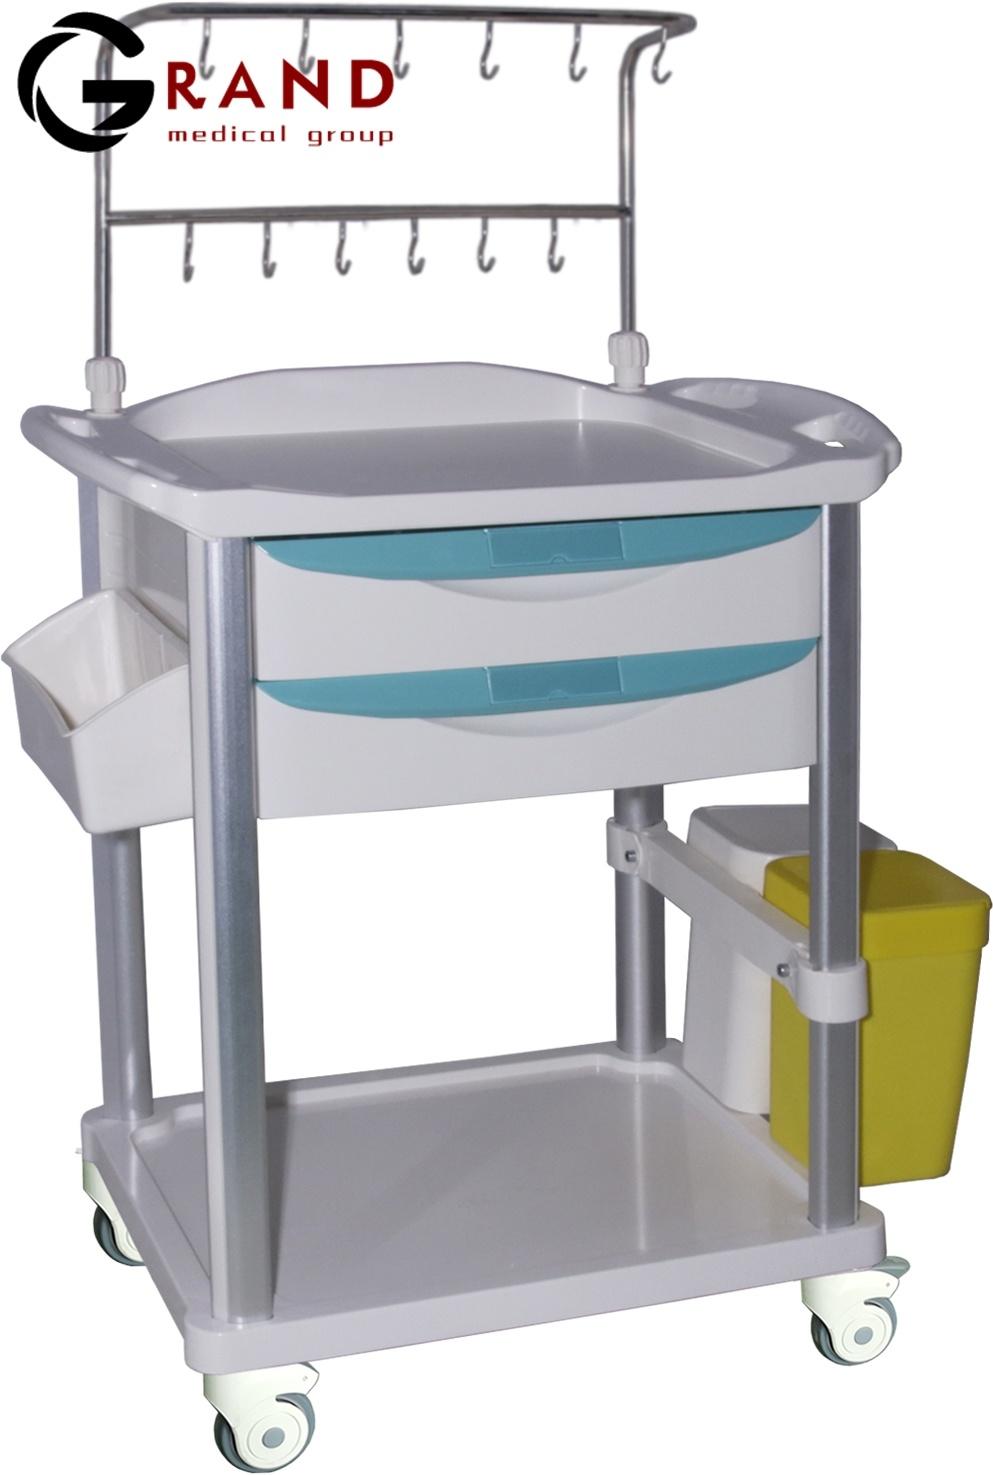 Hot Sale China ABS Medical Trolley Mobile Cart Infusion Delivery Trolley for Hospital